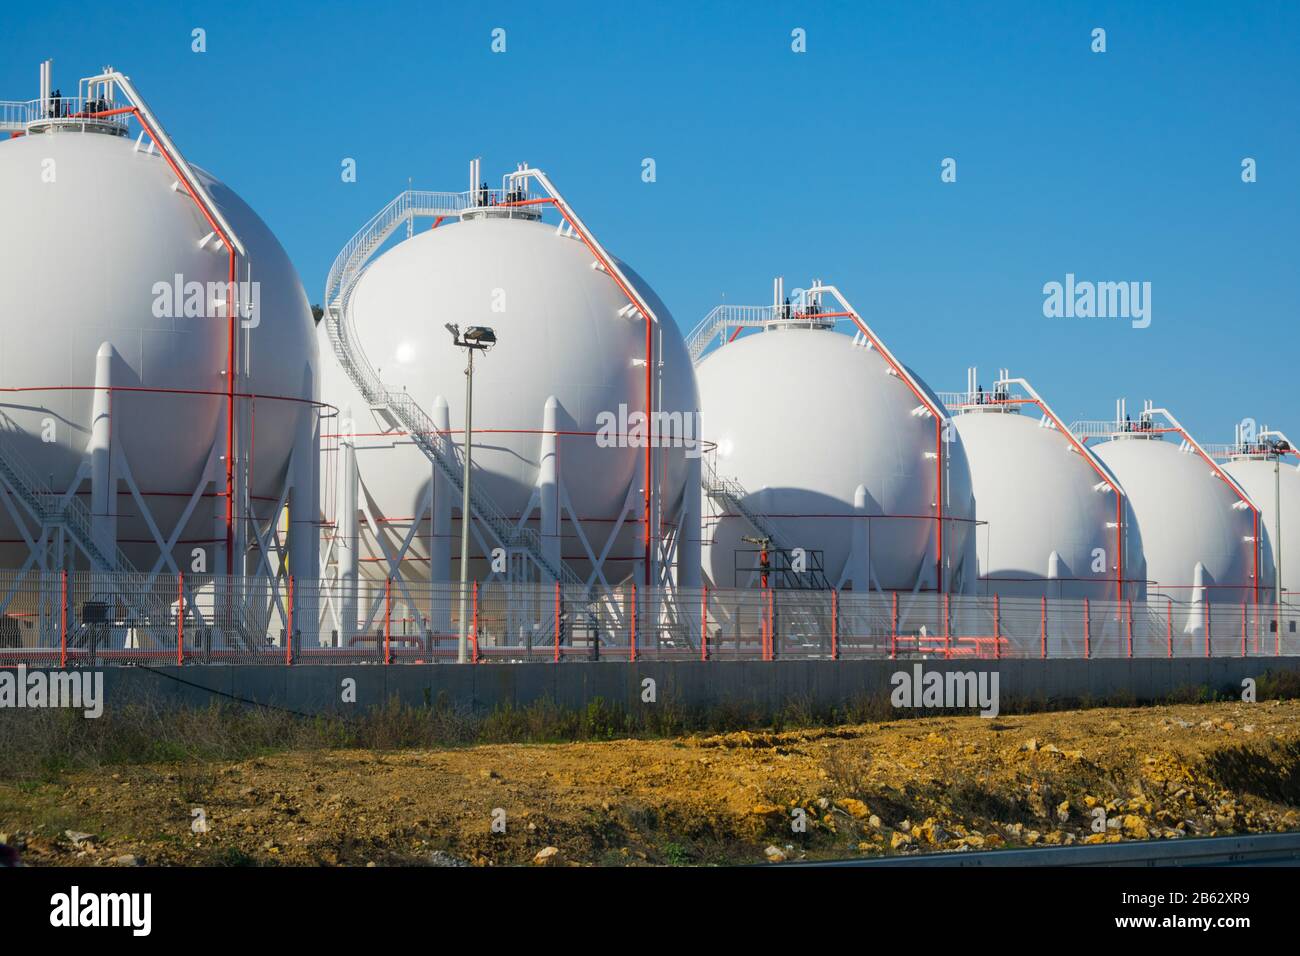 LPG or LNG storage tanks on a plant. Liquefied  petroleum gas (LPG) storage tanks. Gas plant. Stock Photo